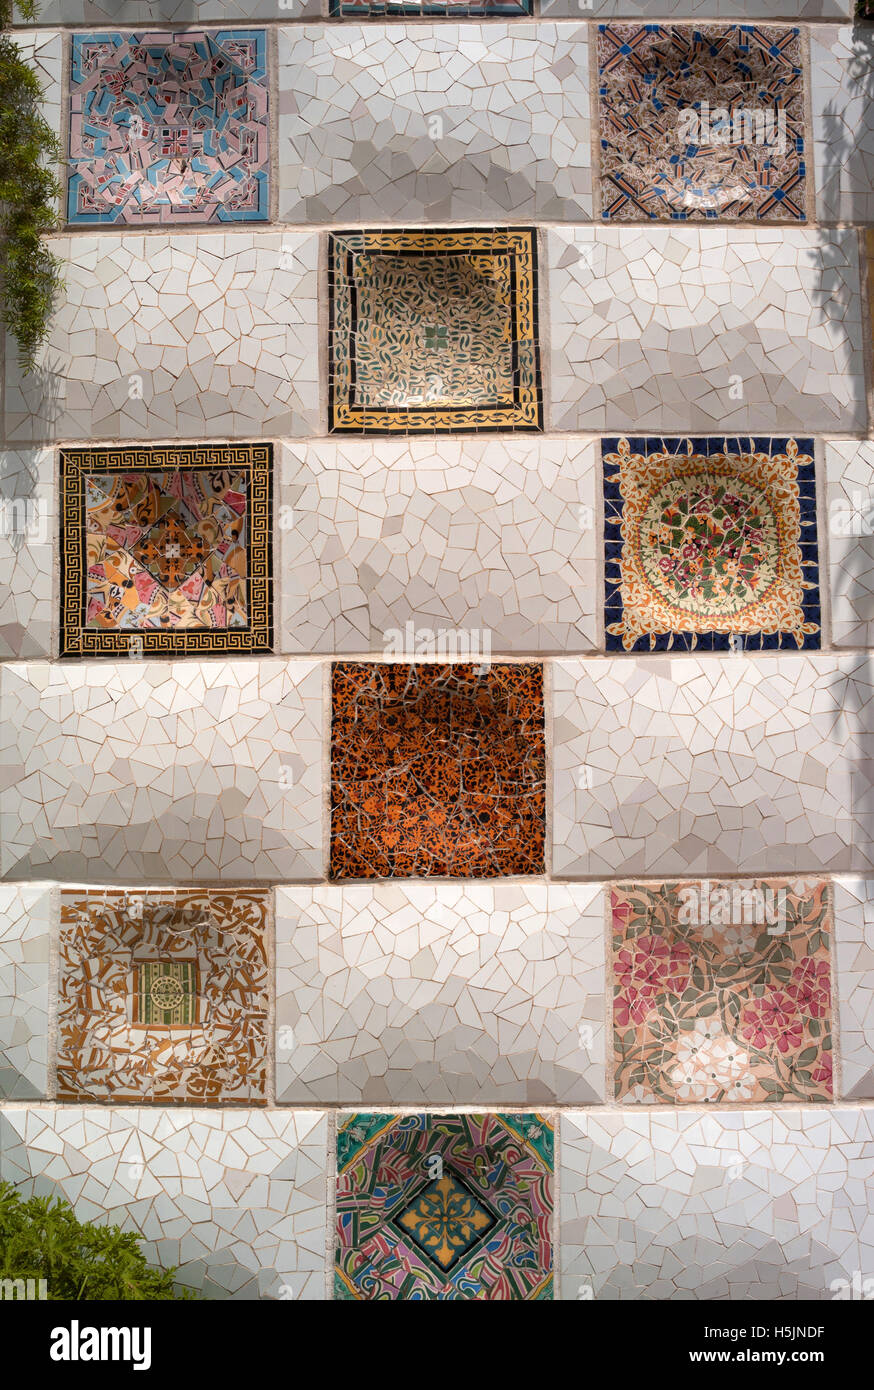 Mosaic tiles by Gaudi, Park Guell, Barcelona Stock Photo